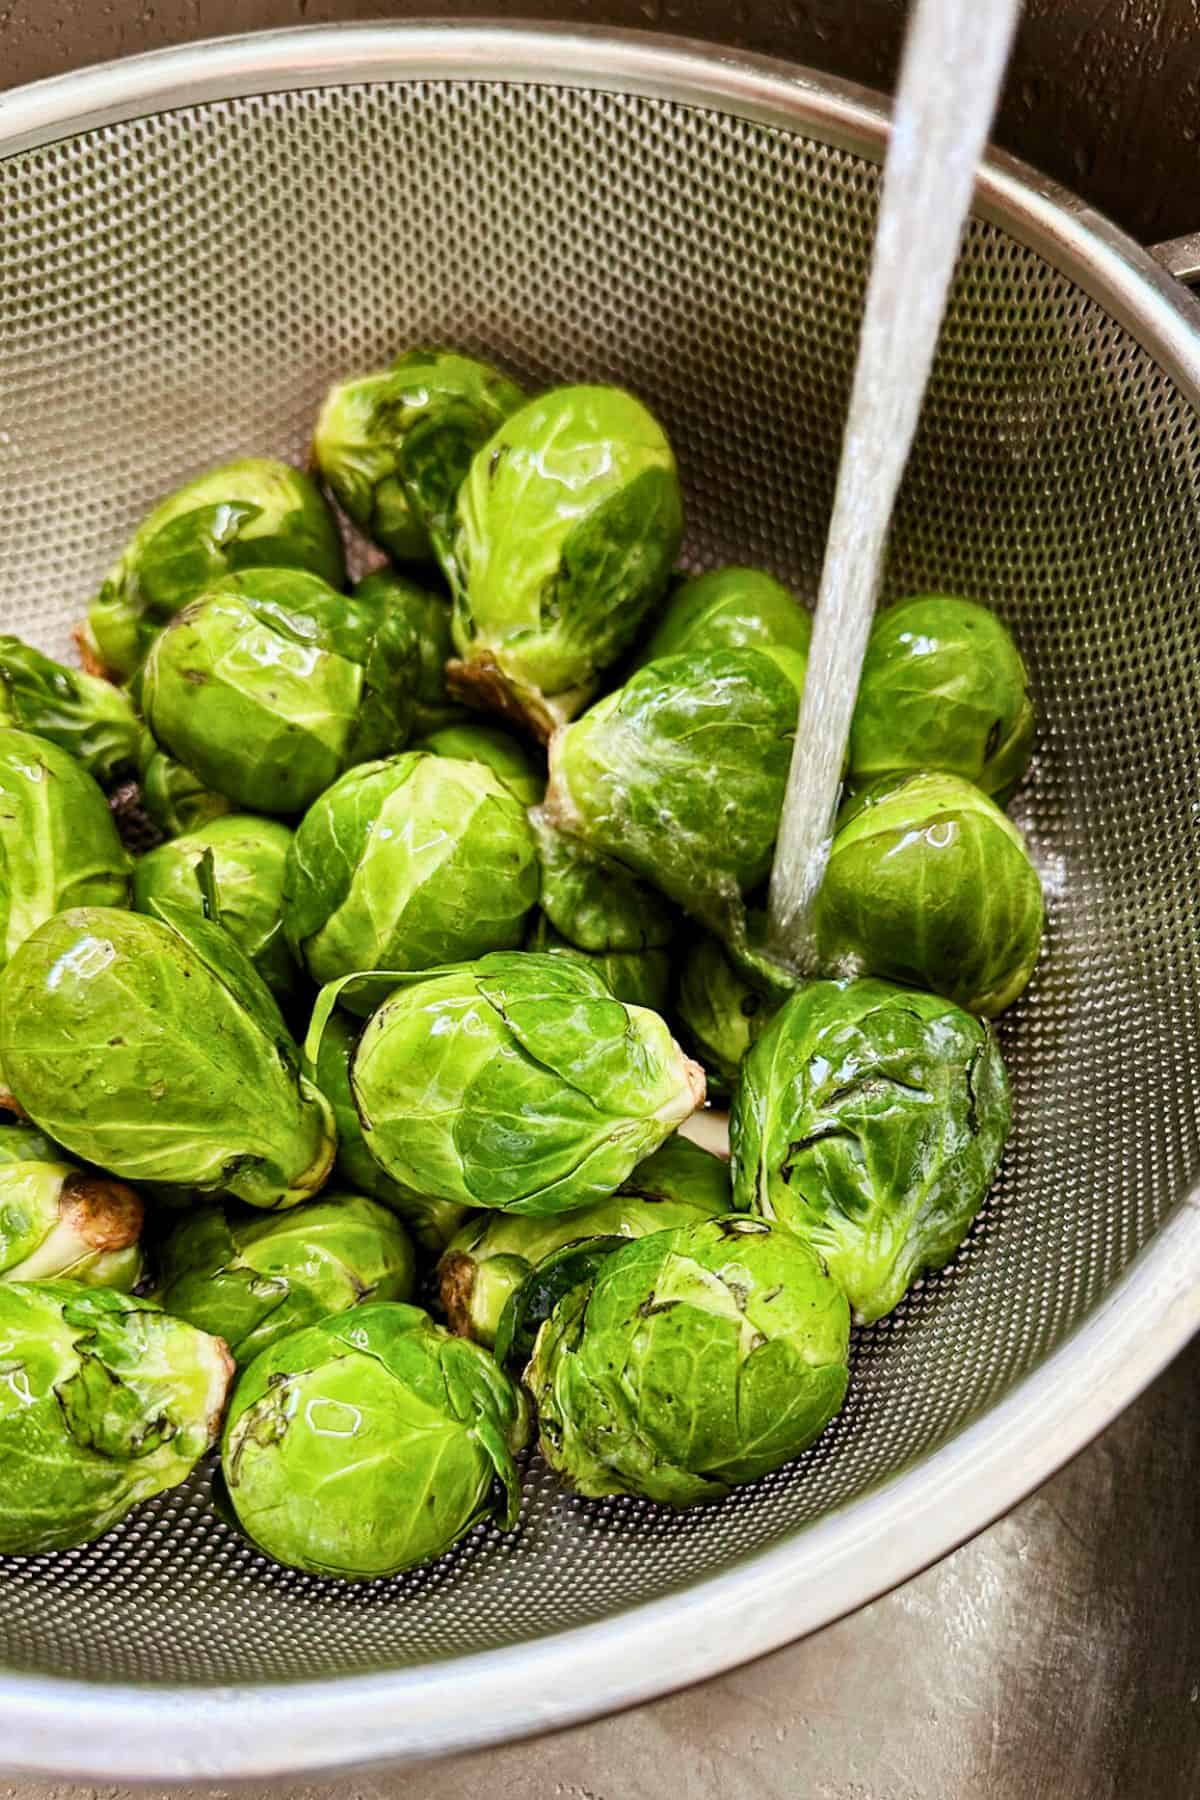 washing brussels sprouts